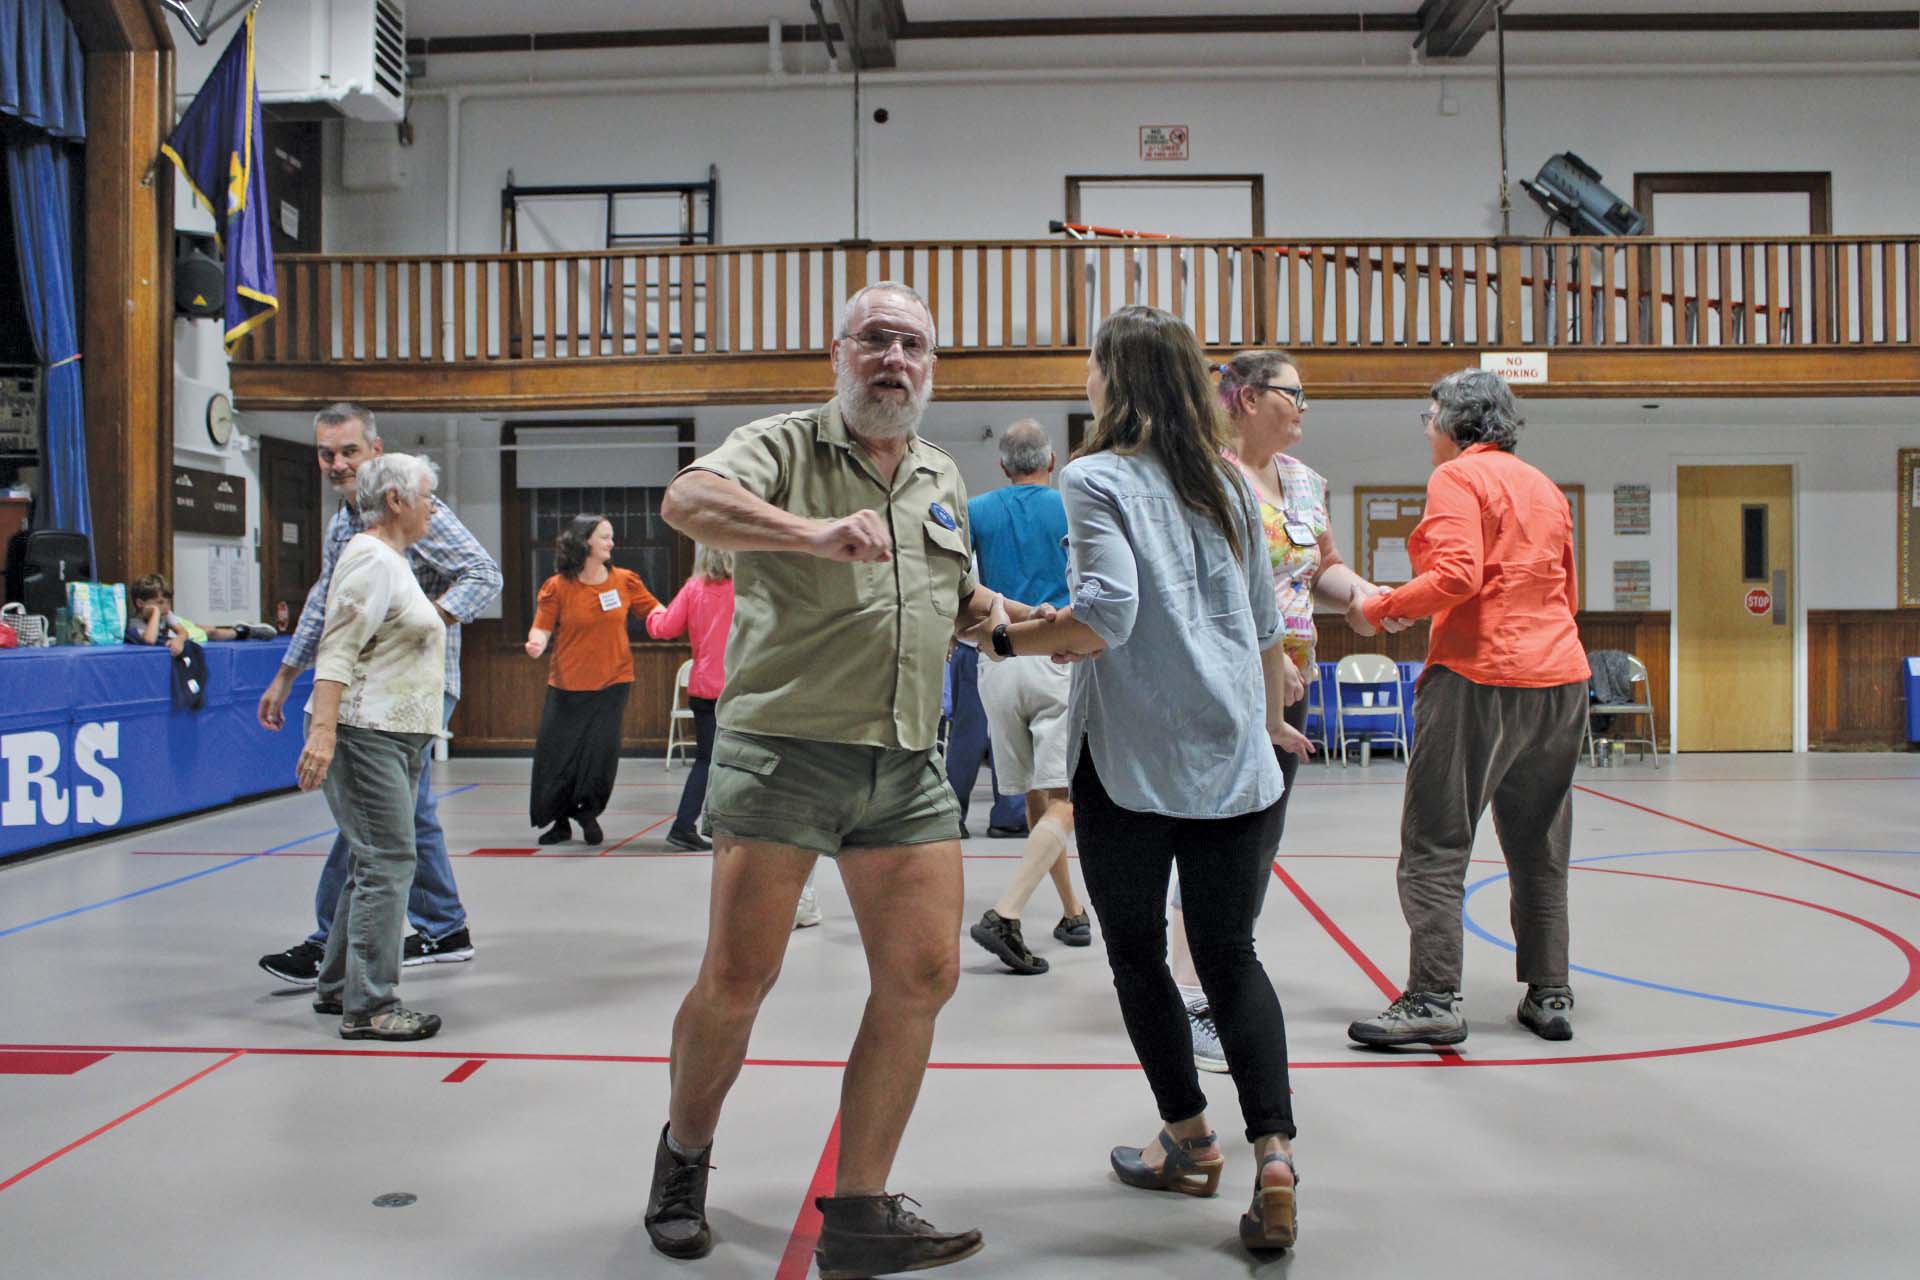 Cast Off 8’s Square Dance Club cuts a rug in Pittsford